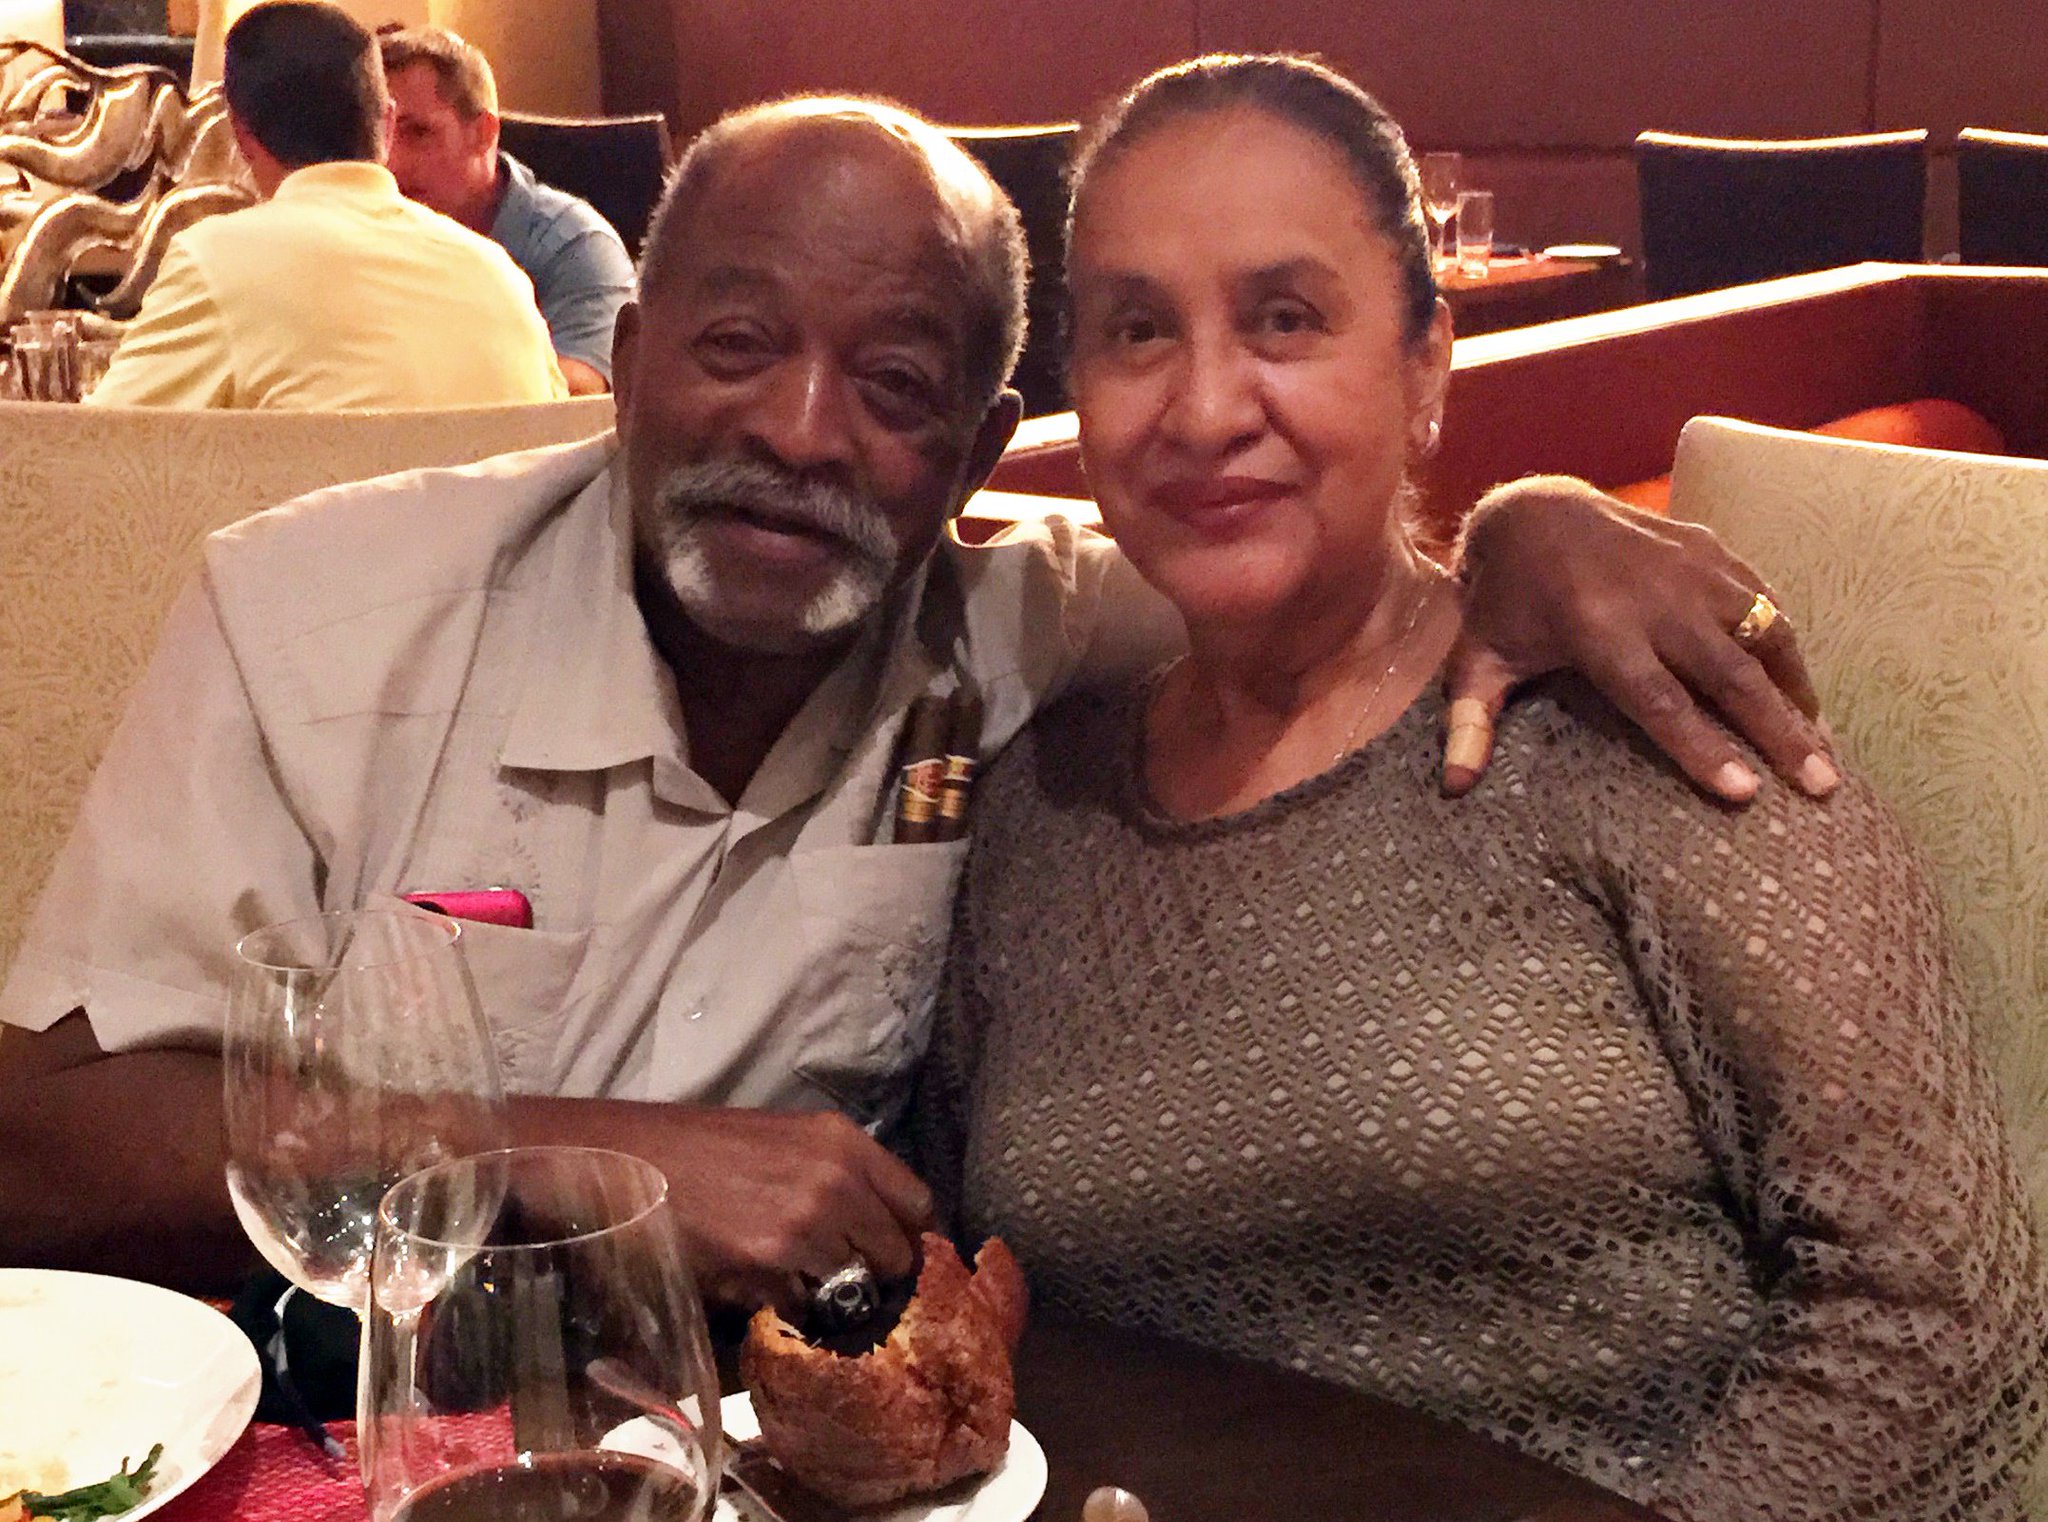  wishes our very good friend & legend Luis Tiant a Happy 75th Birthday today! 